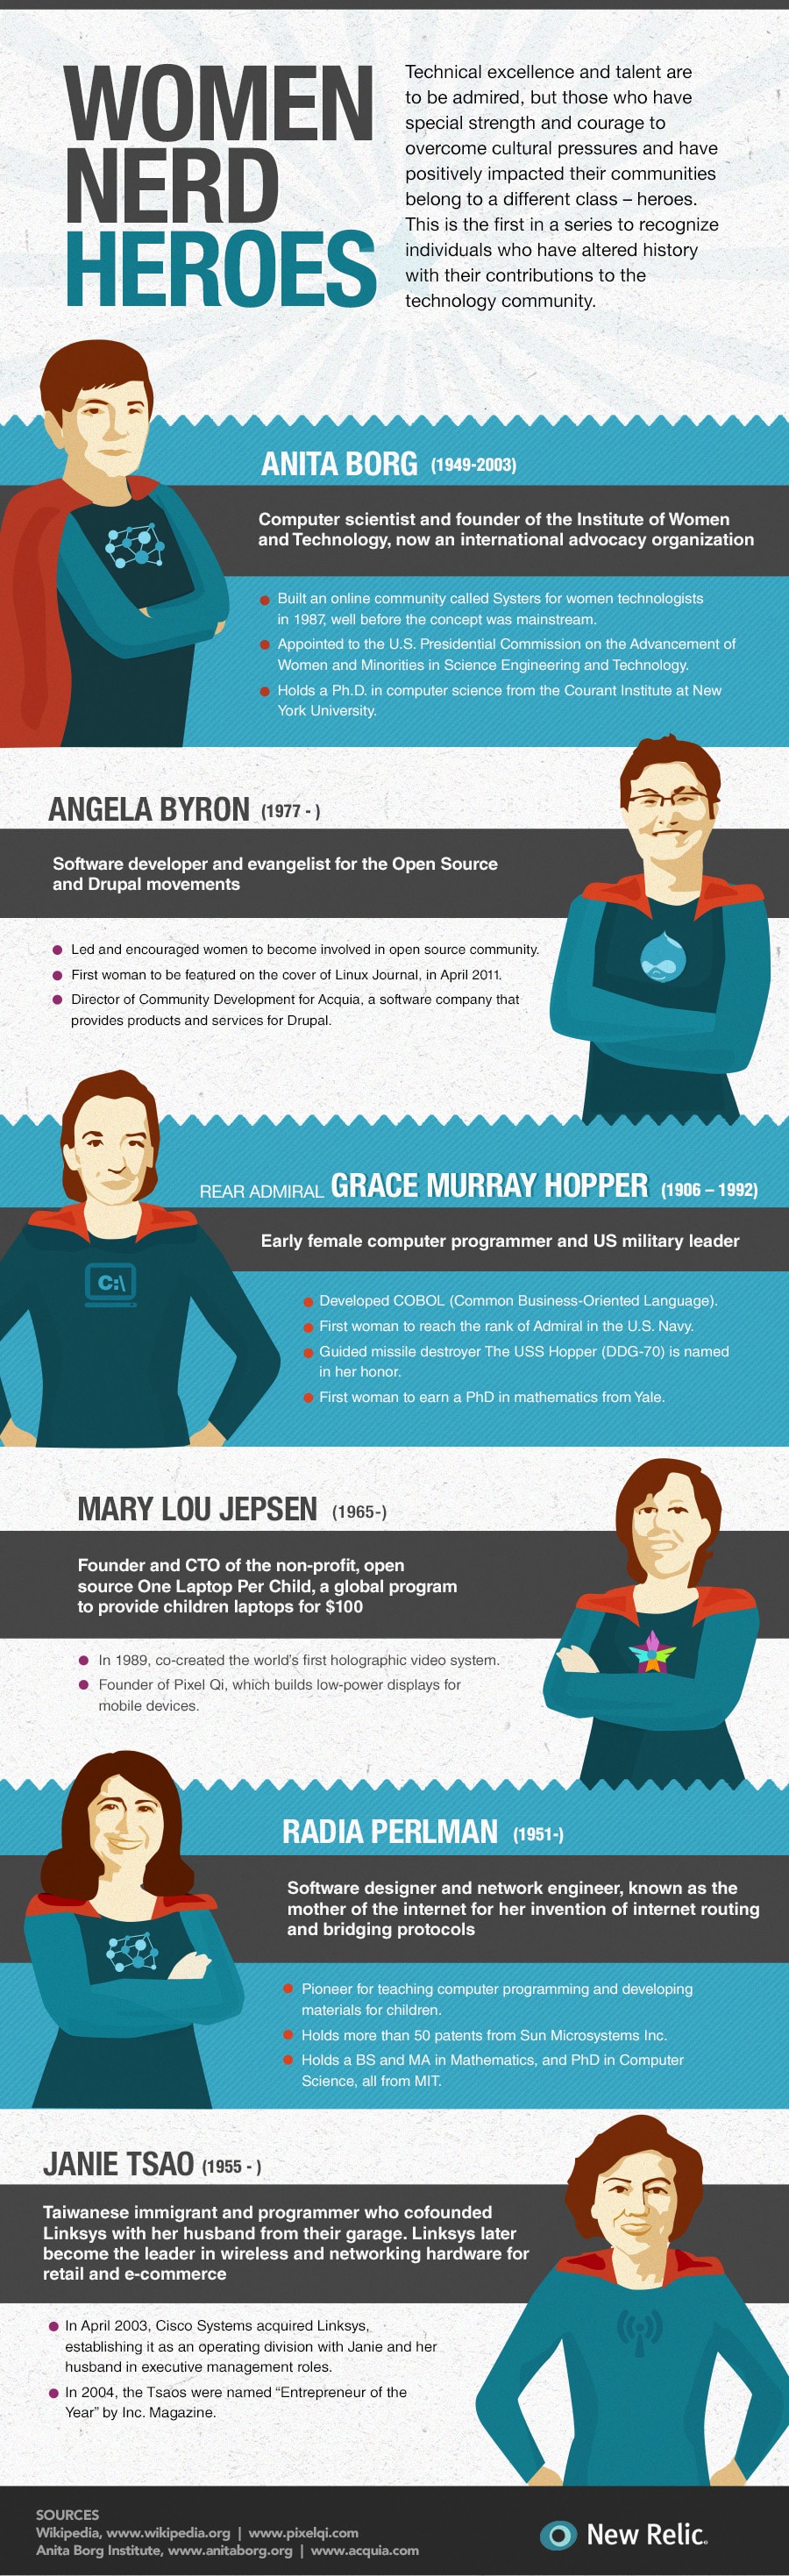 female-nerds-altered-history-infographic